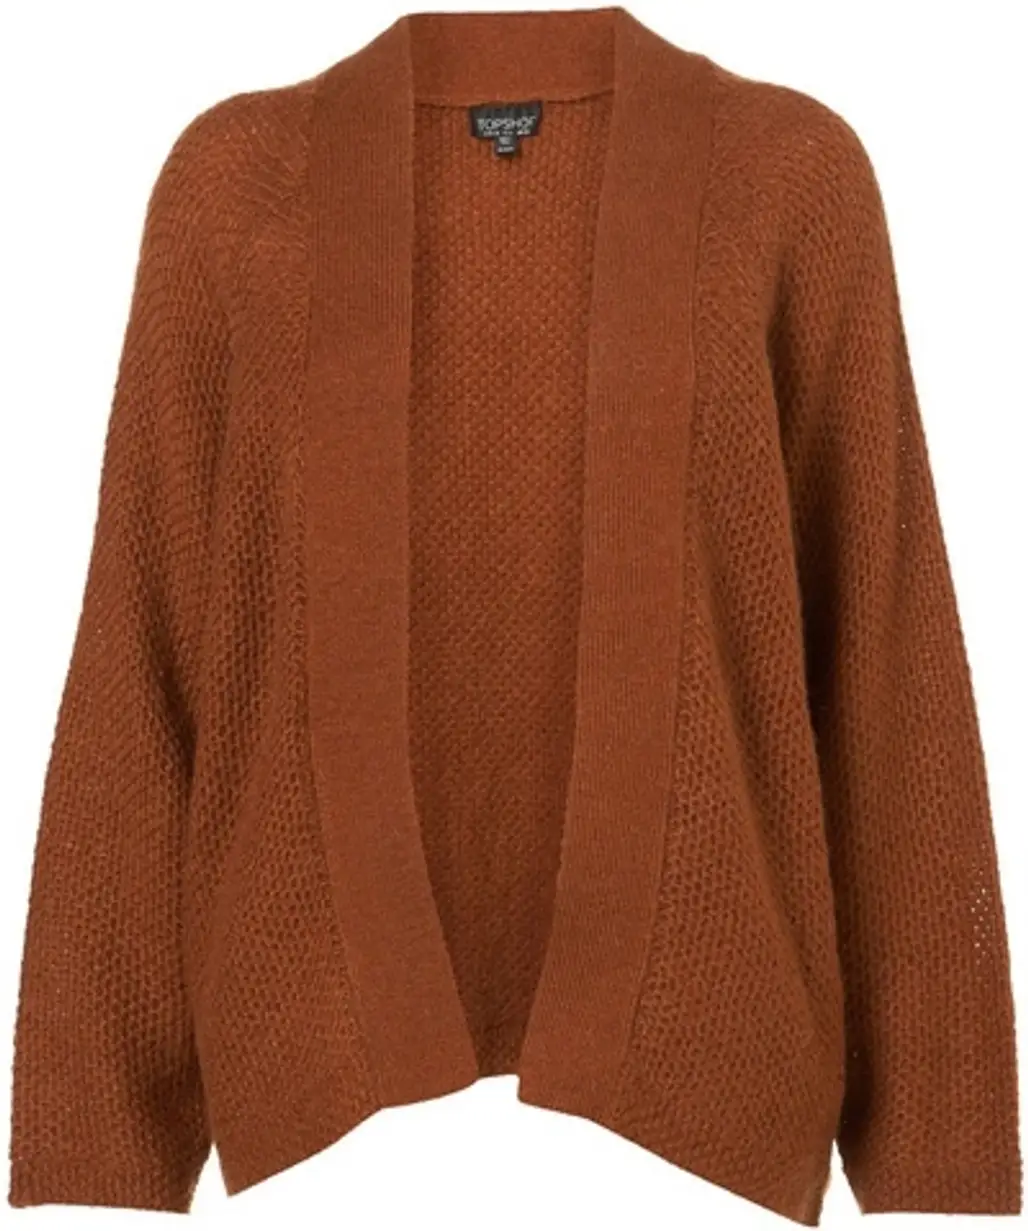 Topshop Knitted Mohair Cardigan